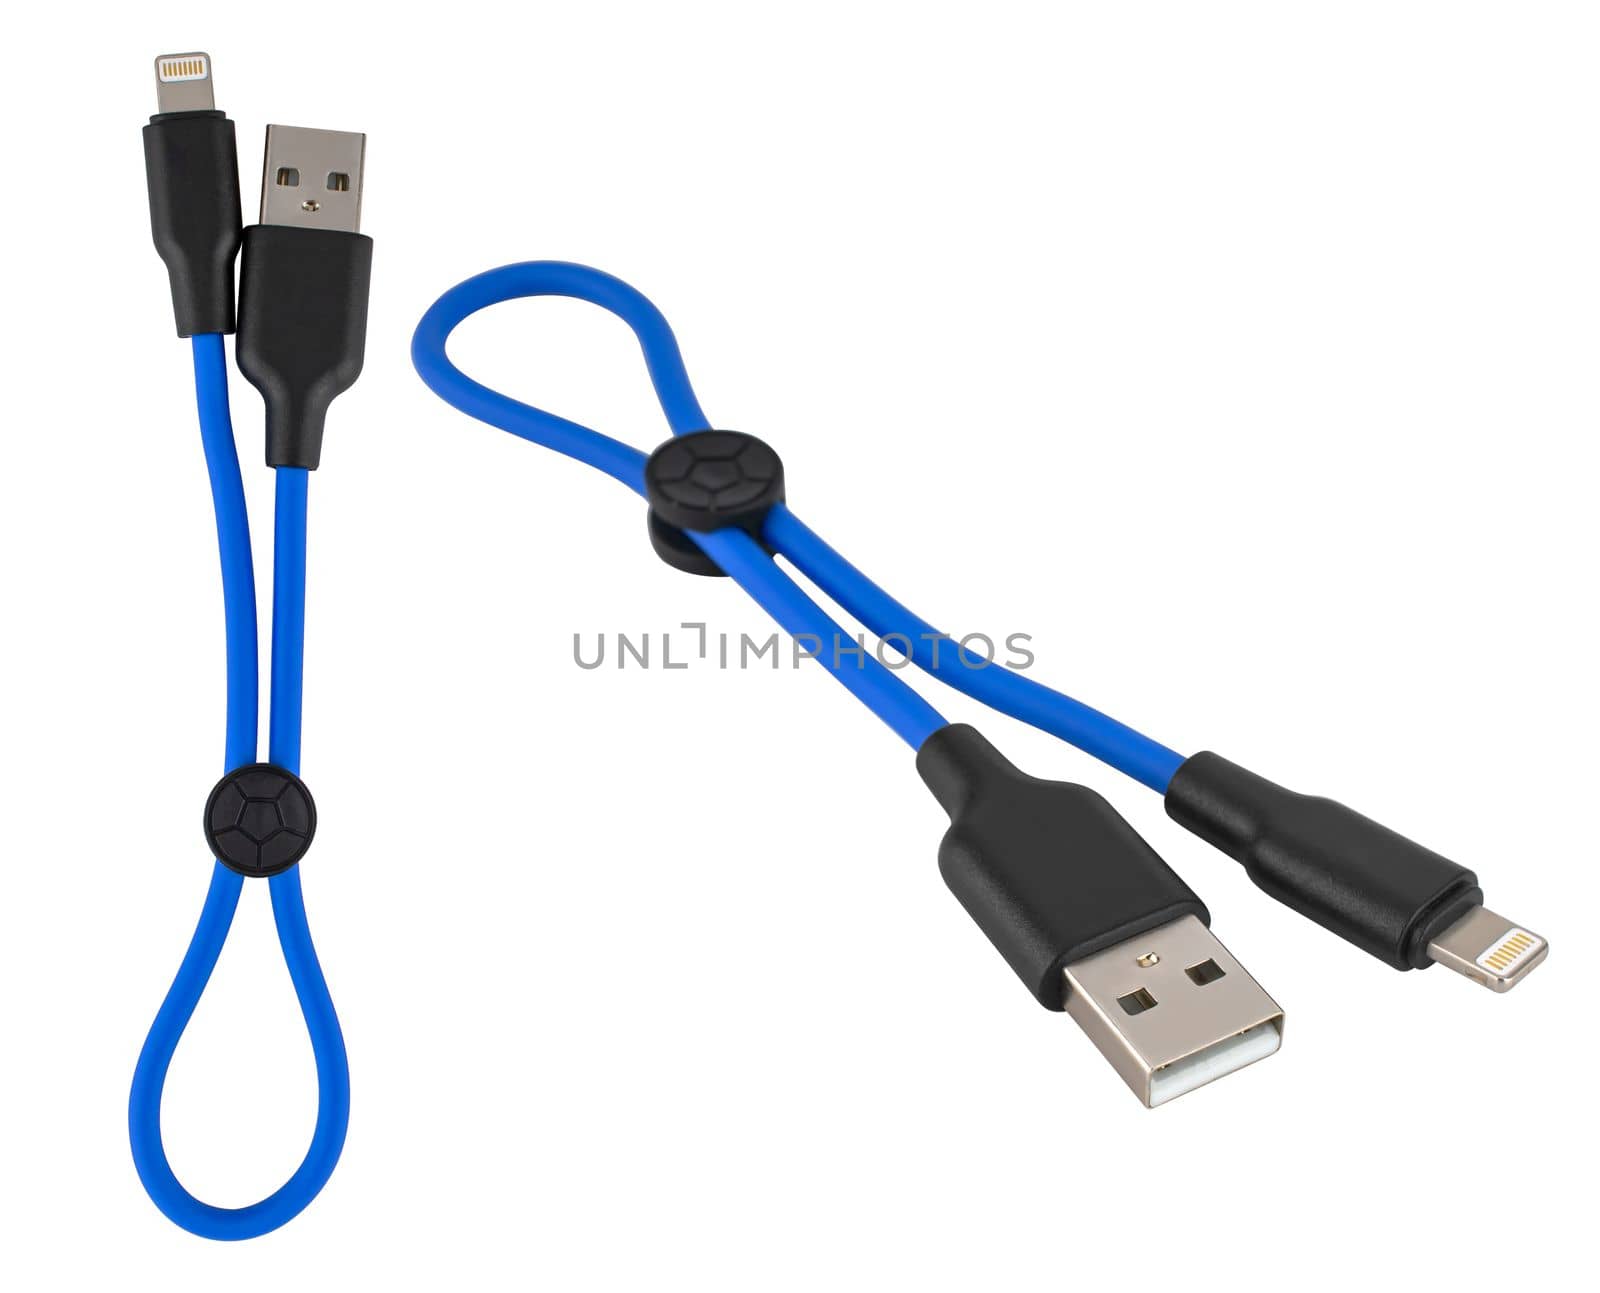 cable with USB connector, Lightning on a white background in isolation